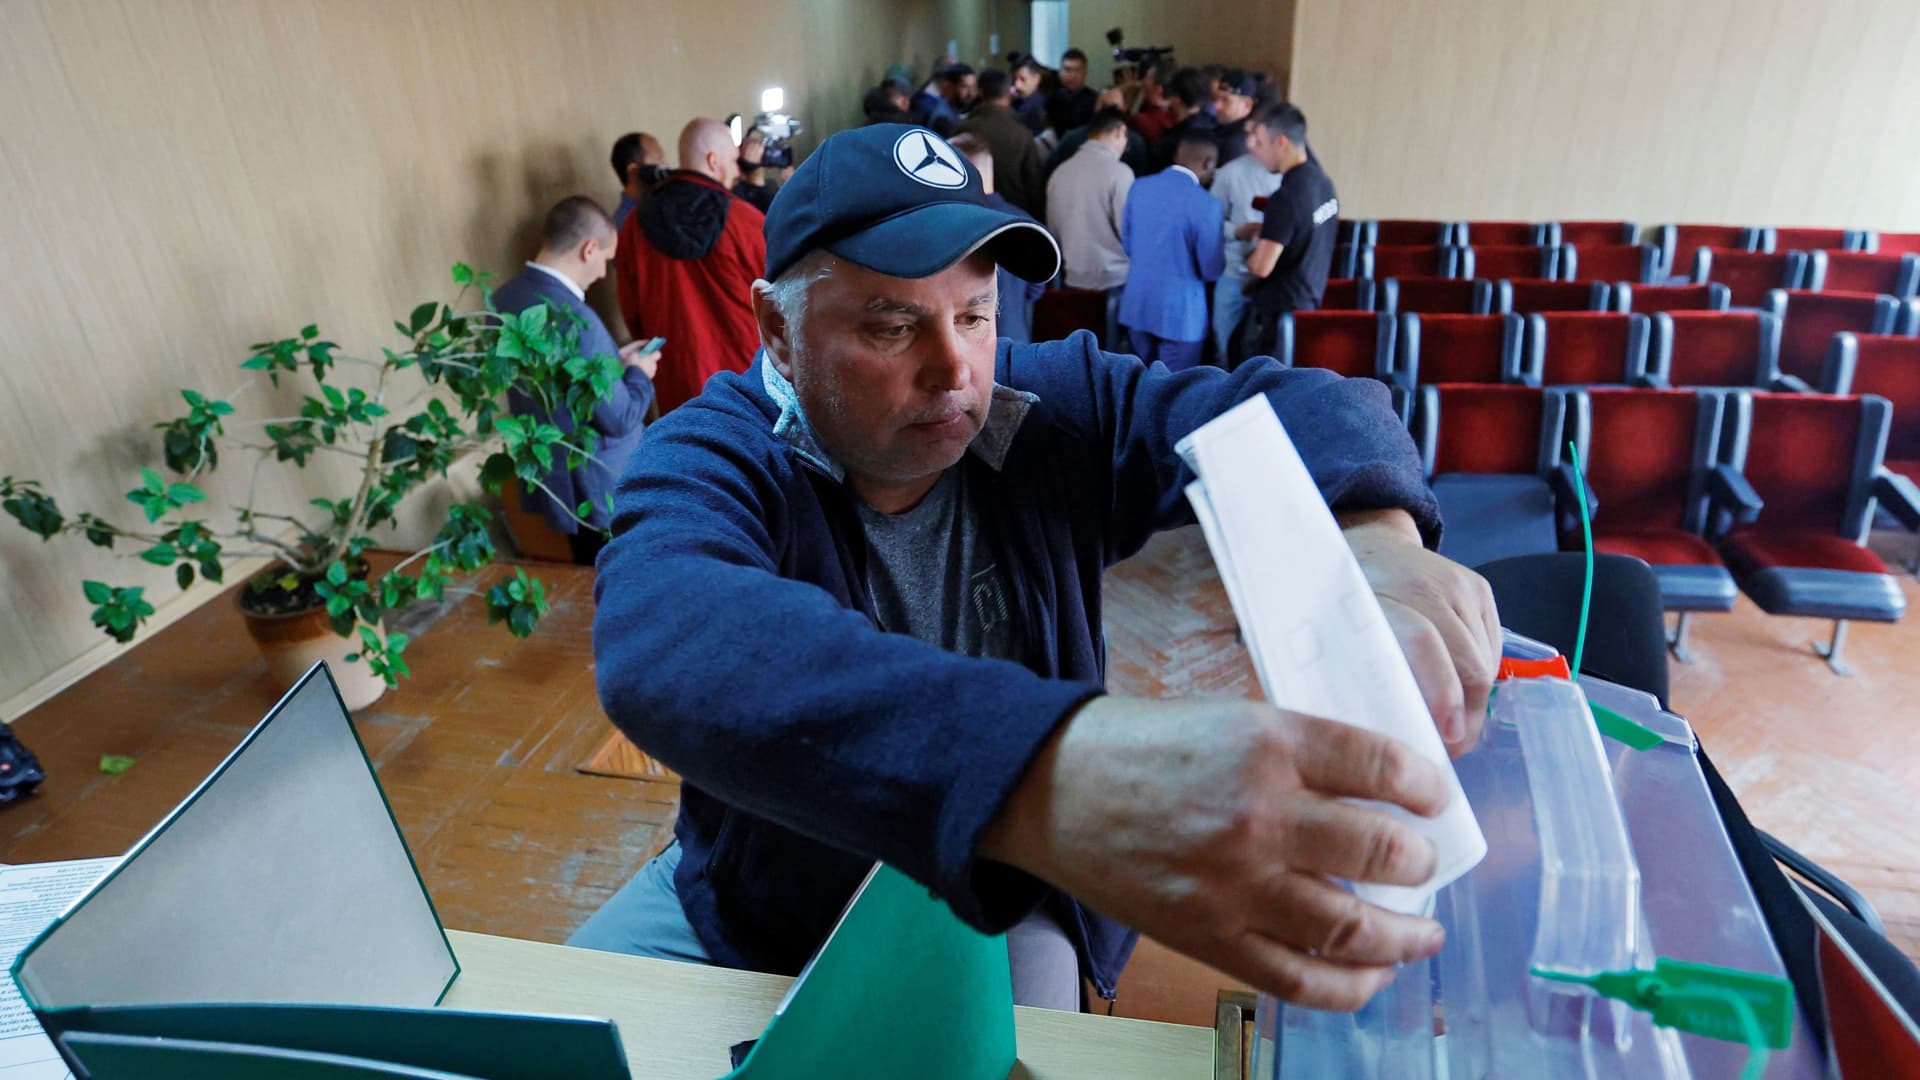 A man casts his ballot during a referendum on the secession of Zaporizhzhia region from Ukraine and its joining Russia, in the Russian-controlled city of Melitopol in the Zaporizhzhia region, Ukraine September 26, 2022. 